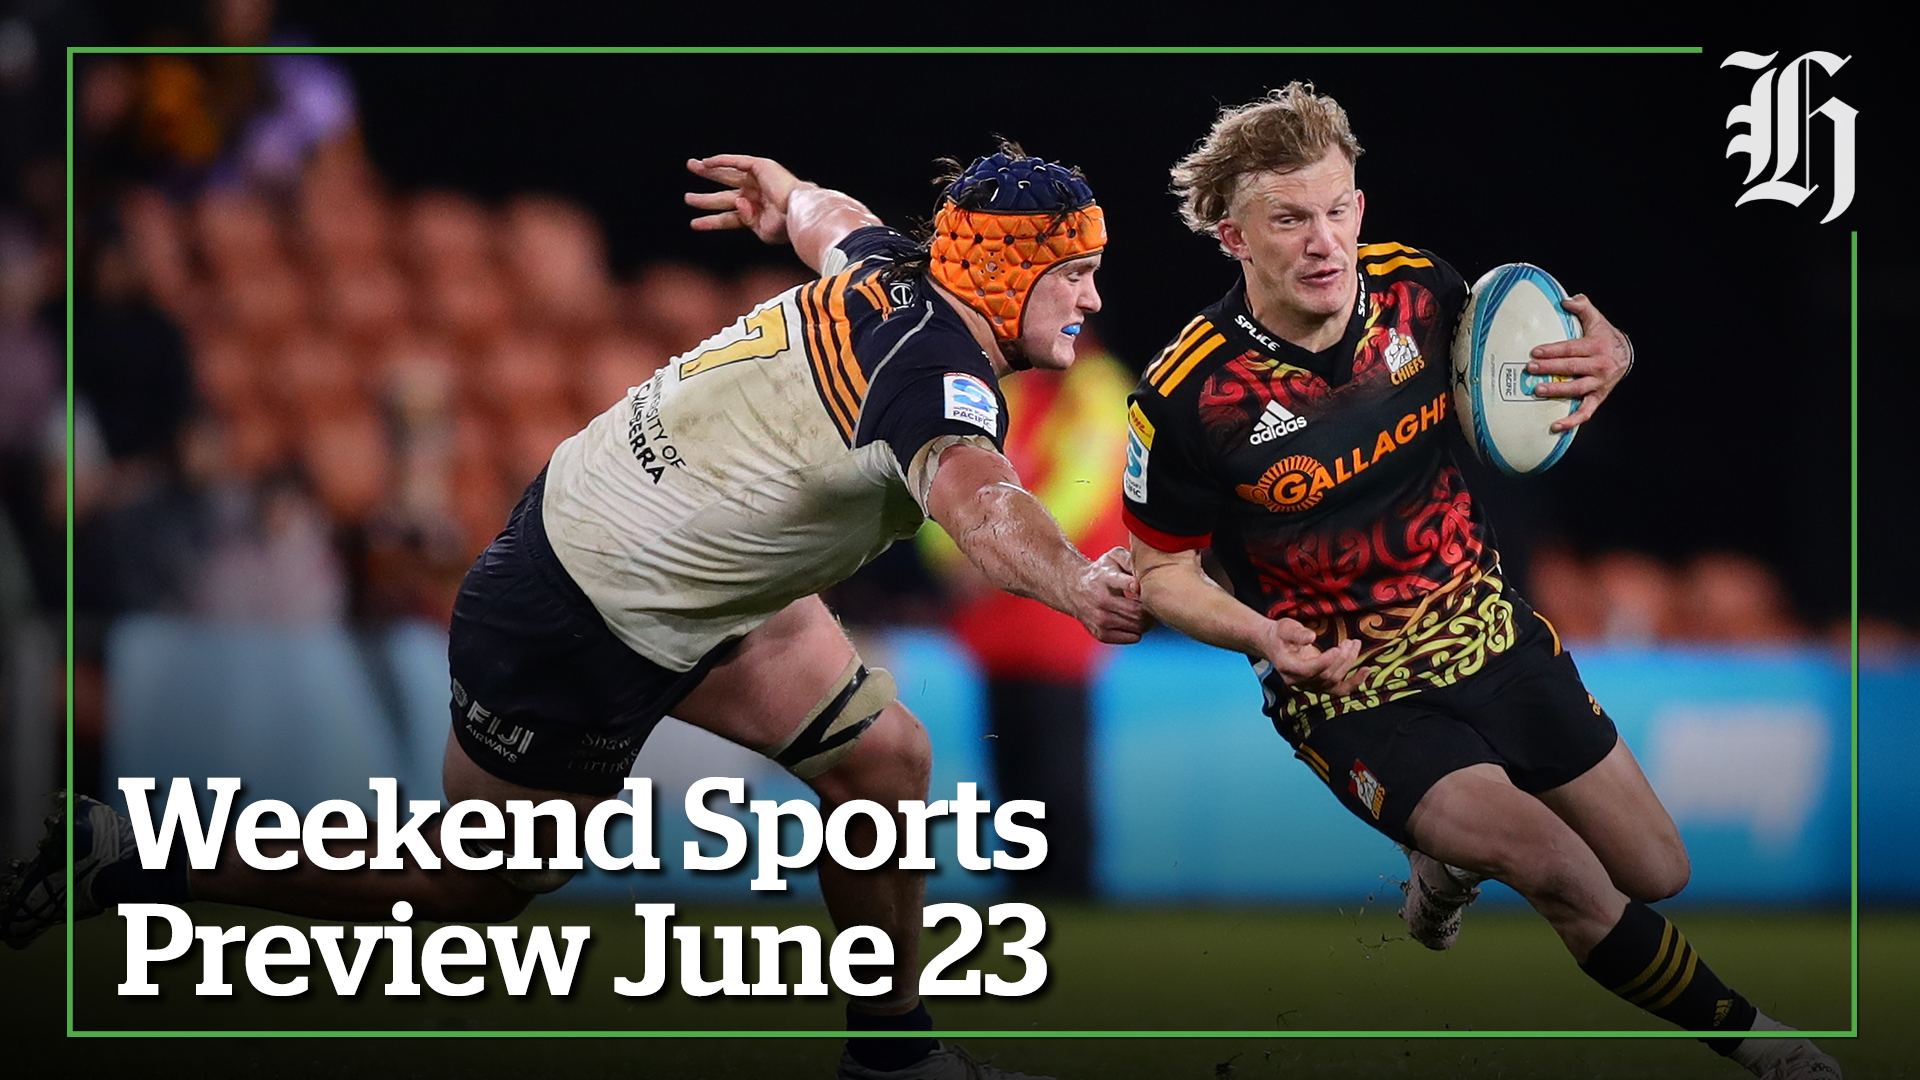 Chiefs v Crusaders Super Rugby Pacific final live updates - Kickoff time, how to watch in NZ, live streaming, teams, odds